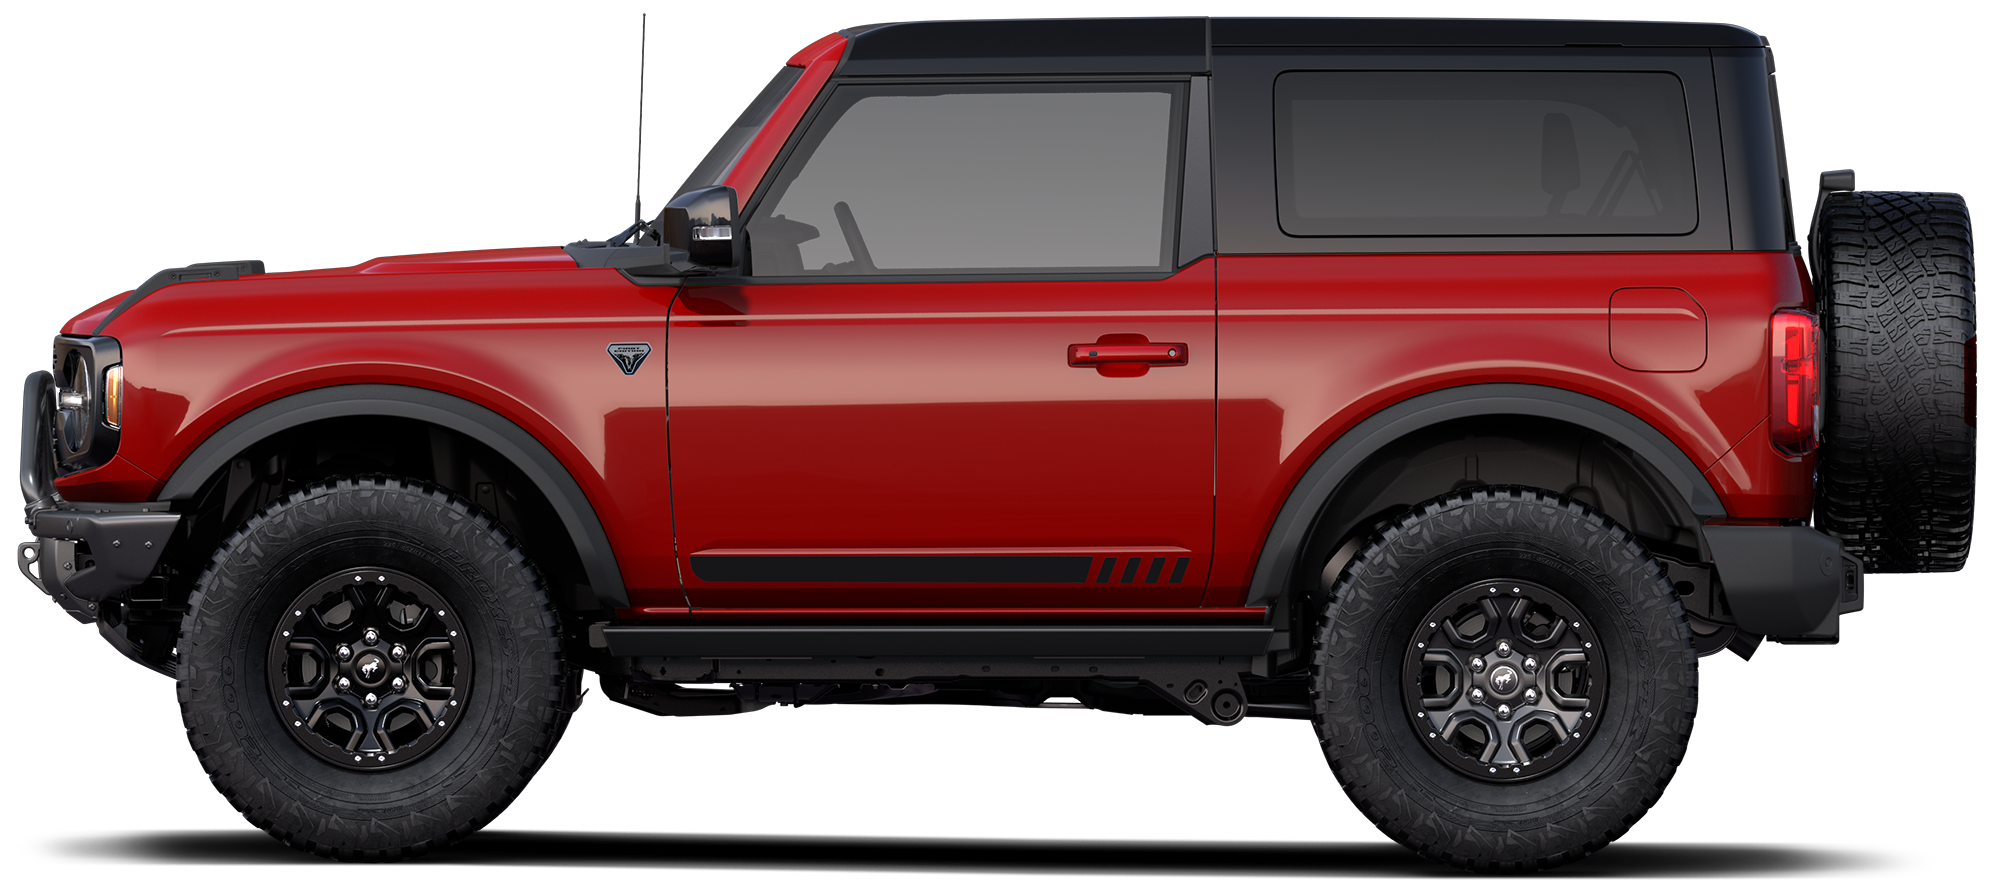 Ford Bronco PNG HD Quality